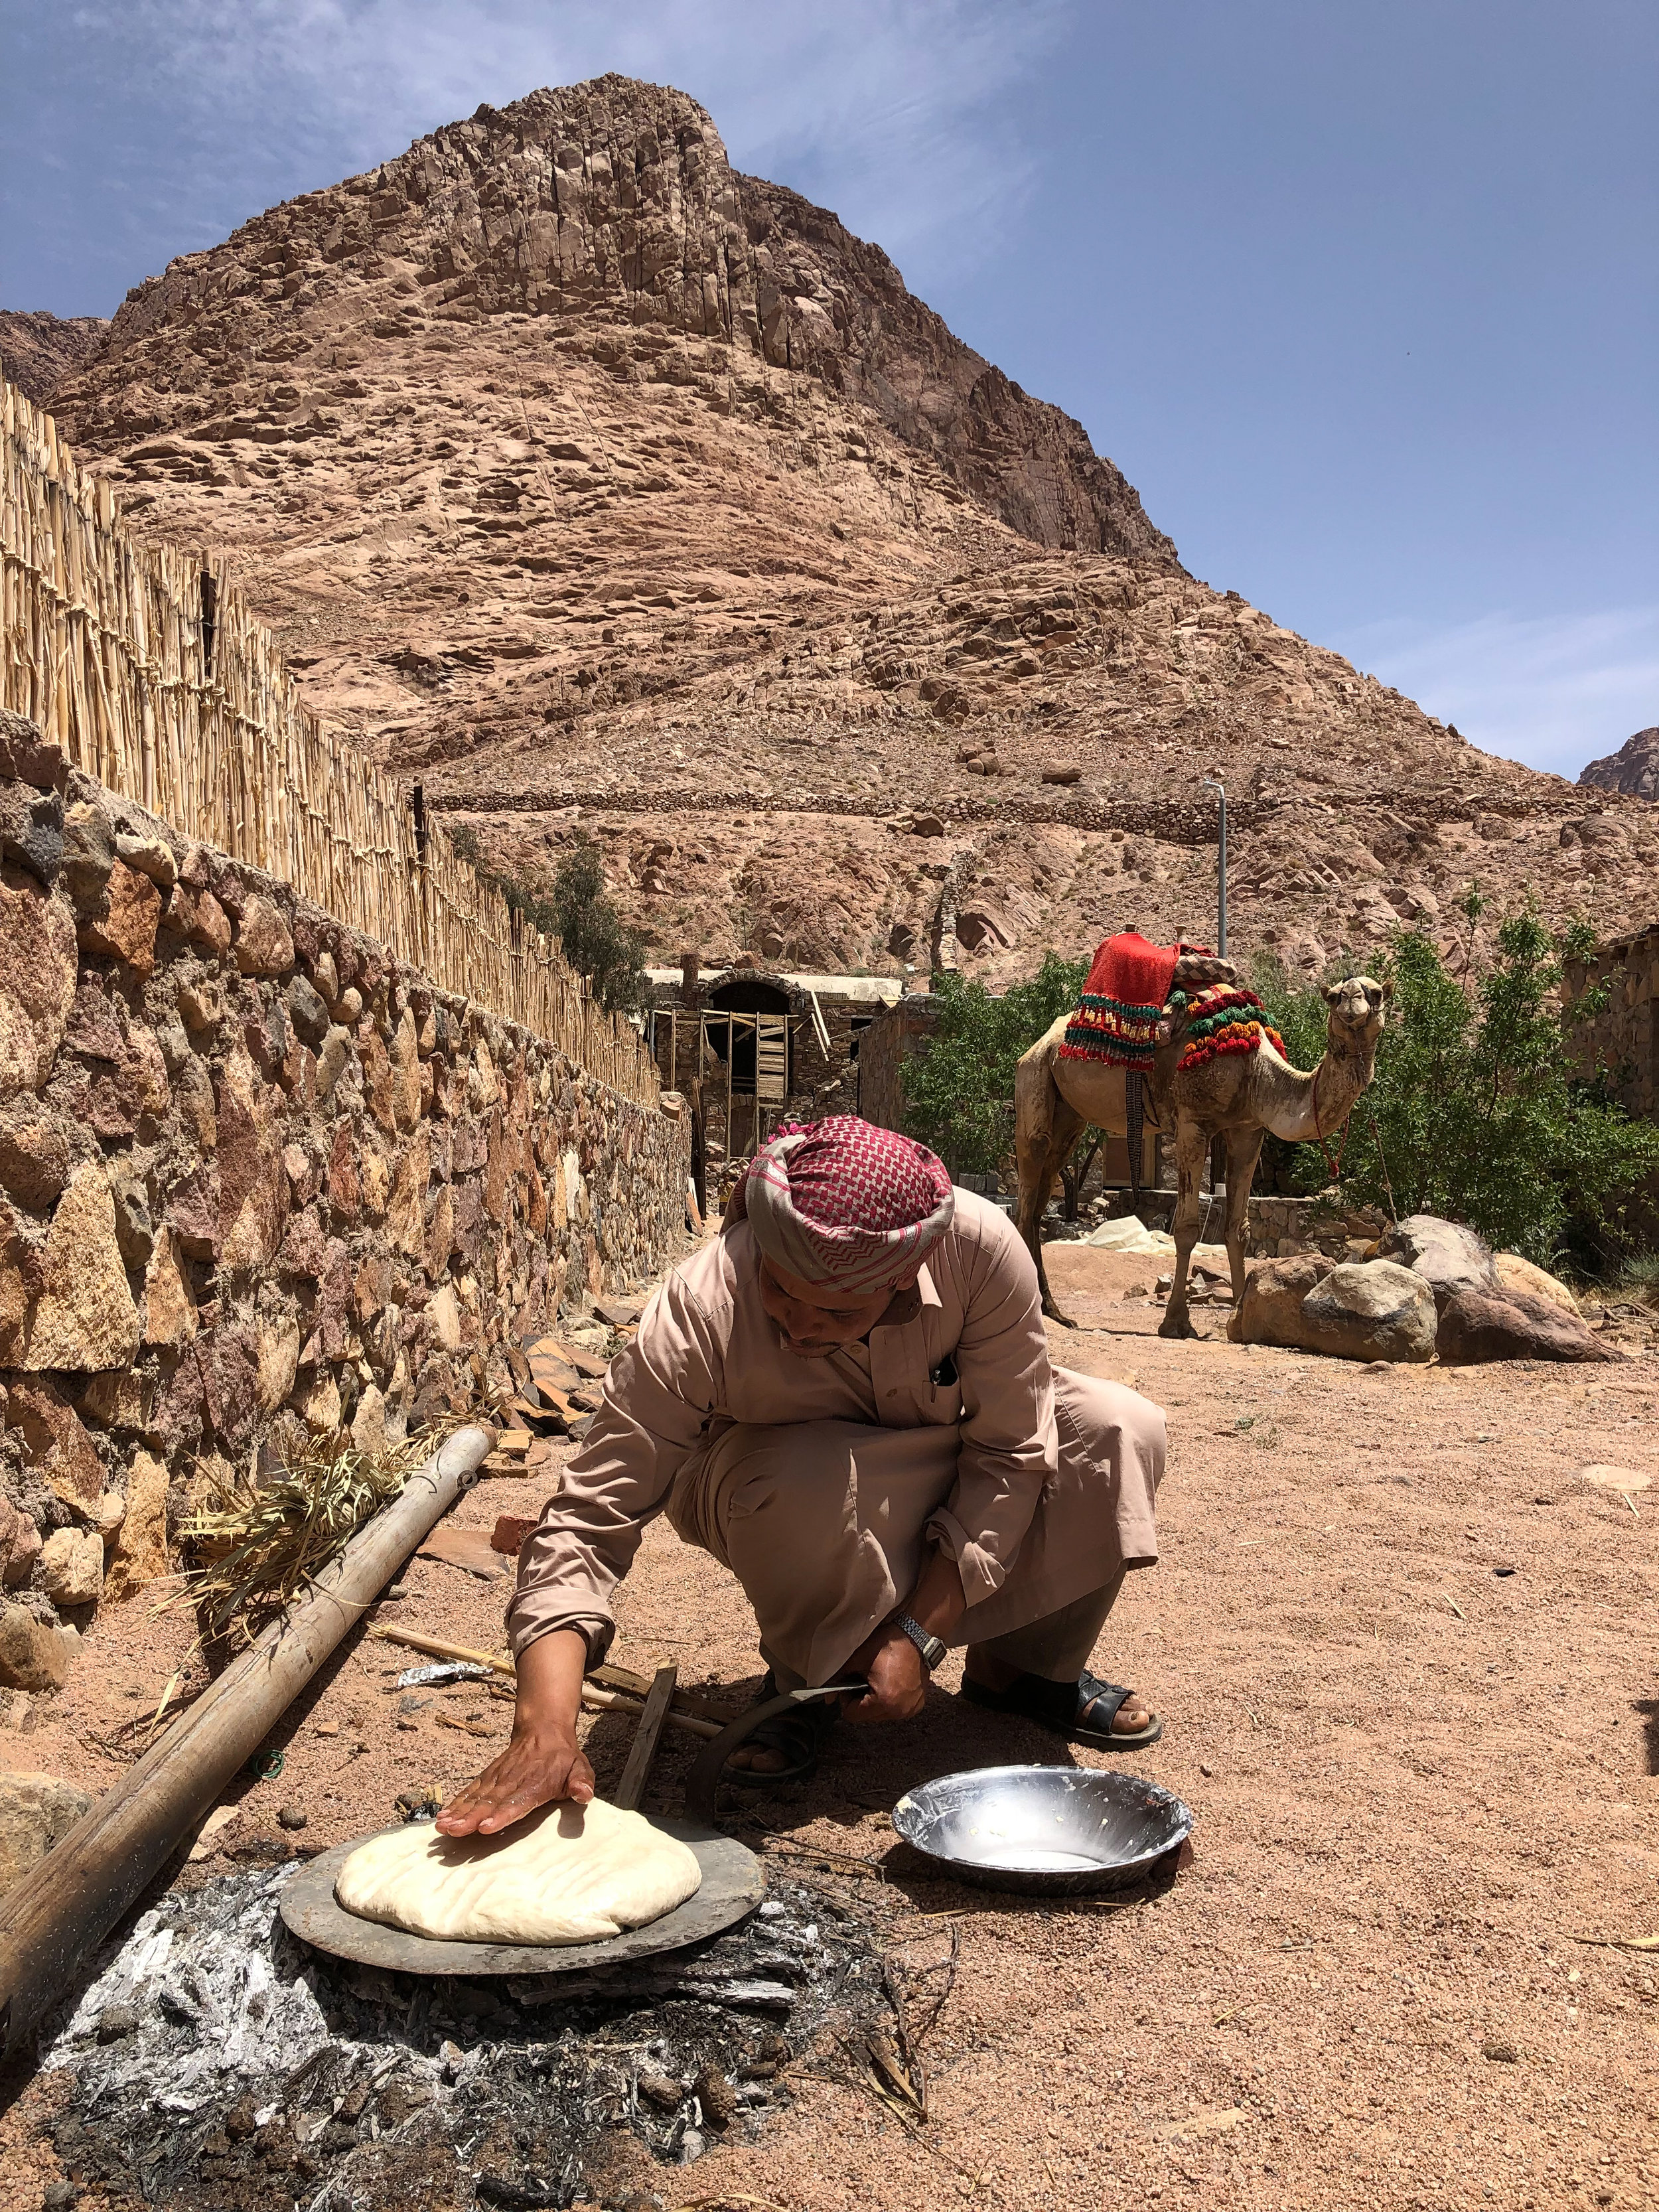 Bedouin making bread, St Catherines City, Sinai - Egypt - Wild Earth Expeditions